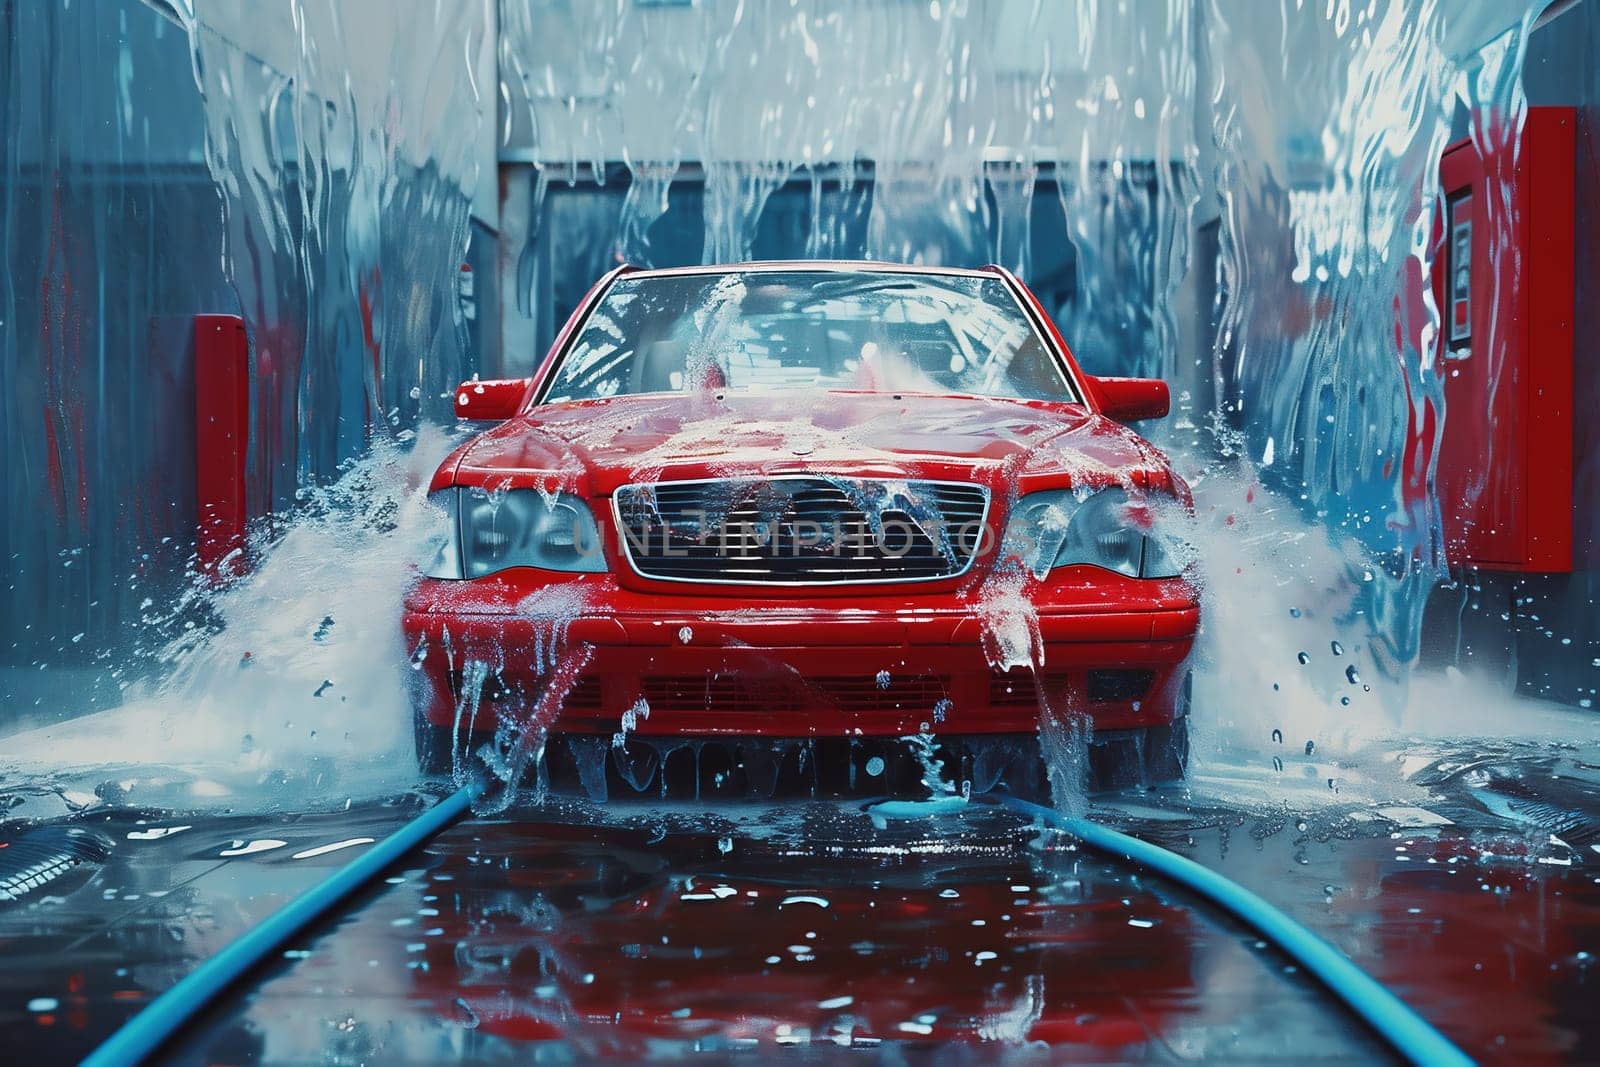 A car running through an automatic car wash with brushes and water hitting the vehicle. High quality photo